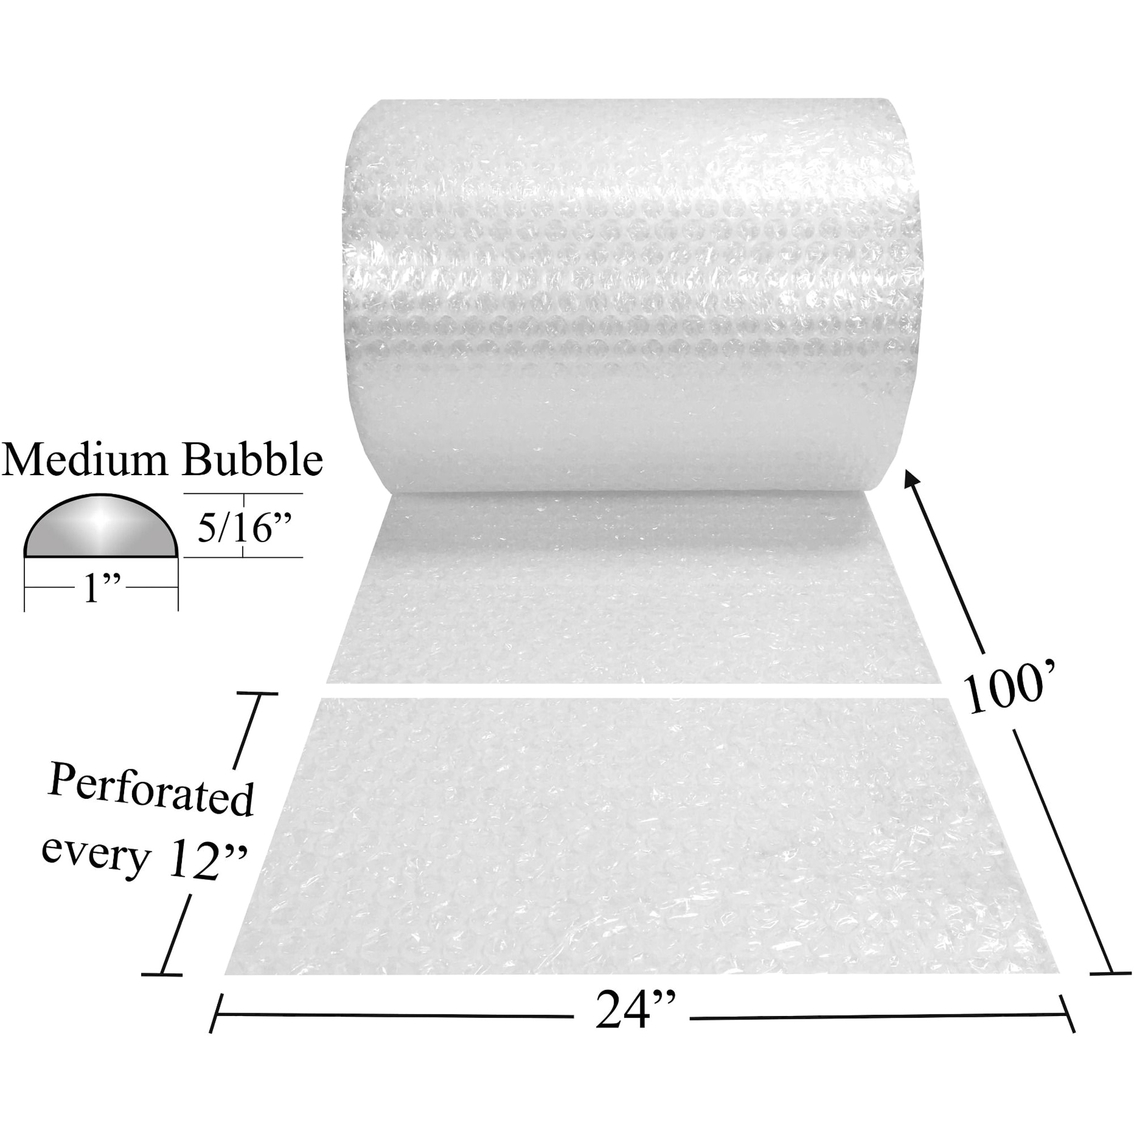 uBoxes Bubble Cushioning 24 in. Wide Wrap x 100 ft. Long Medium Bubbles - Image 2 of 2